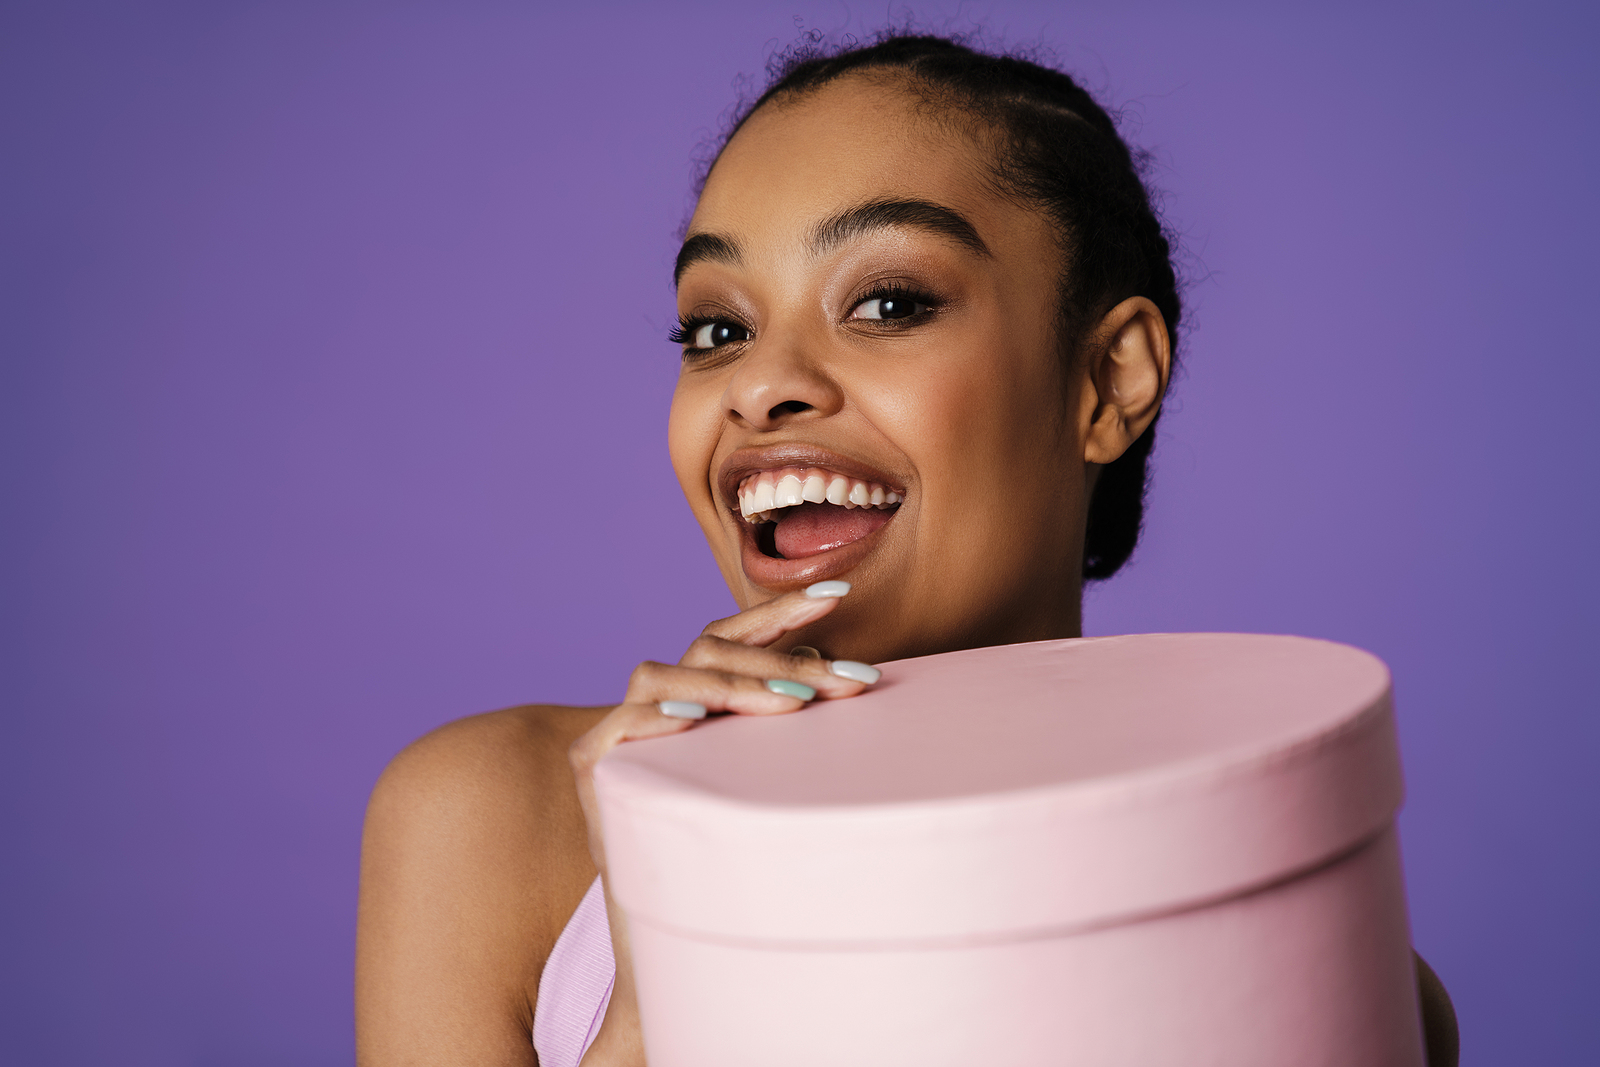 An attractive young black woman with her hair back and a pink shirt holding a circular pink box with a big smile on her face ready to open the box.